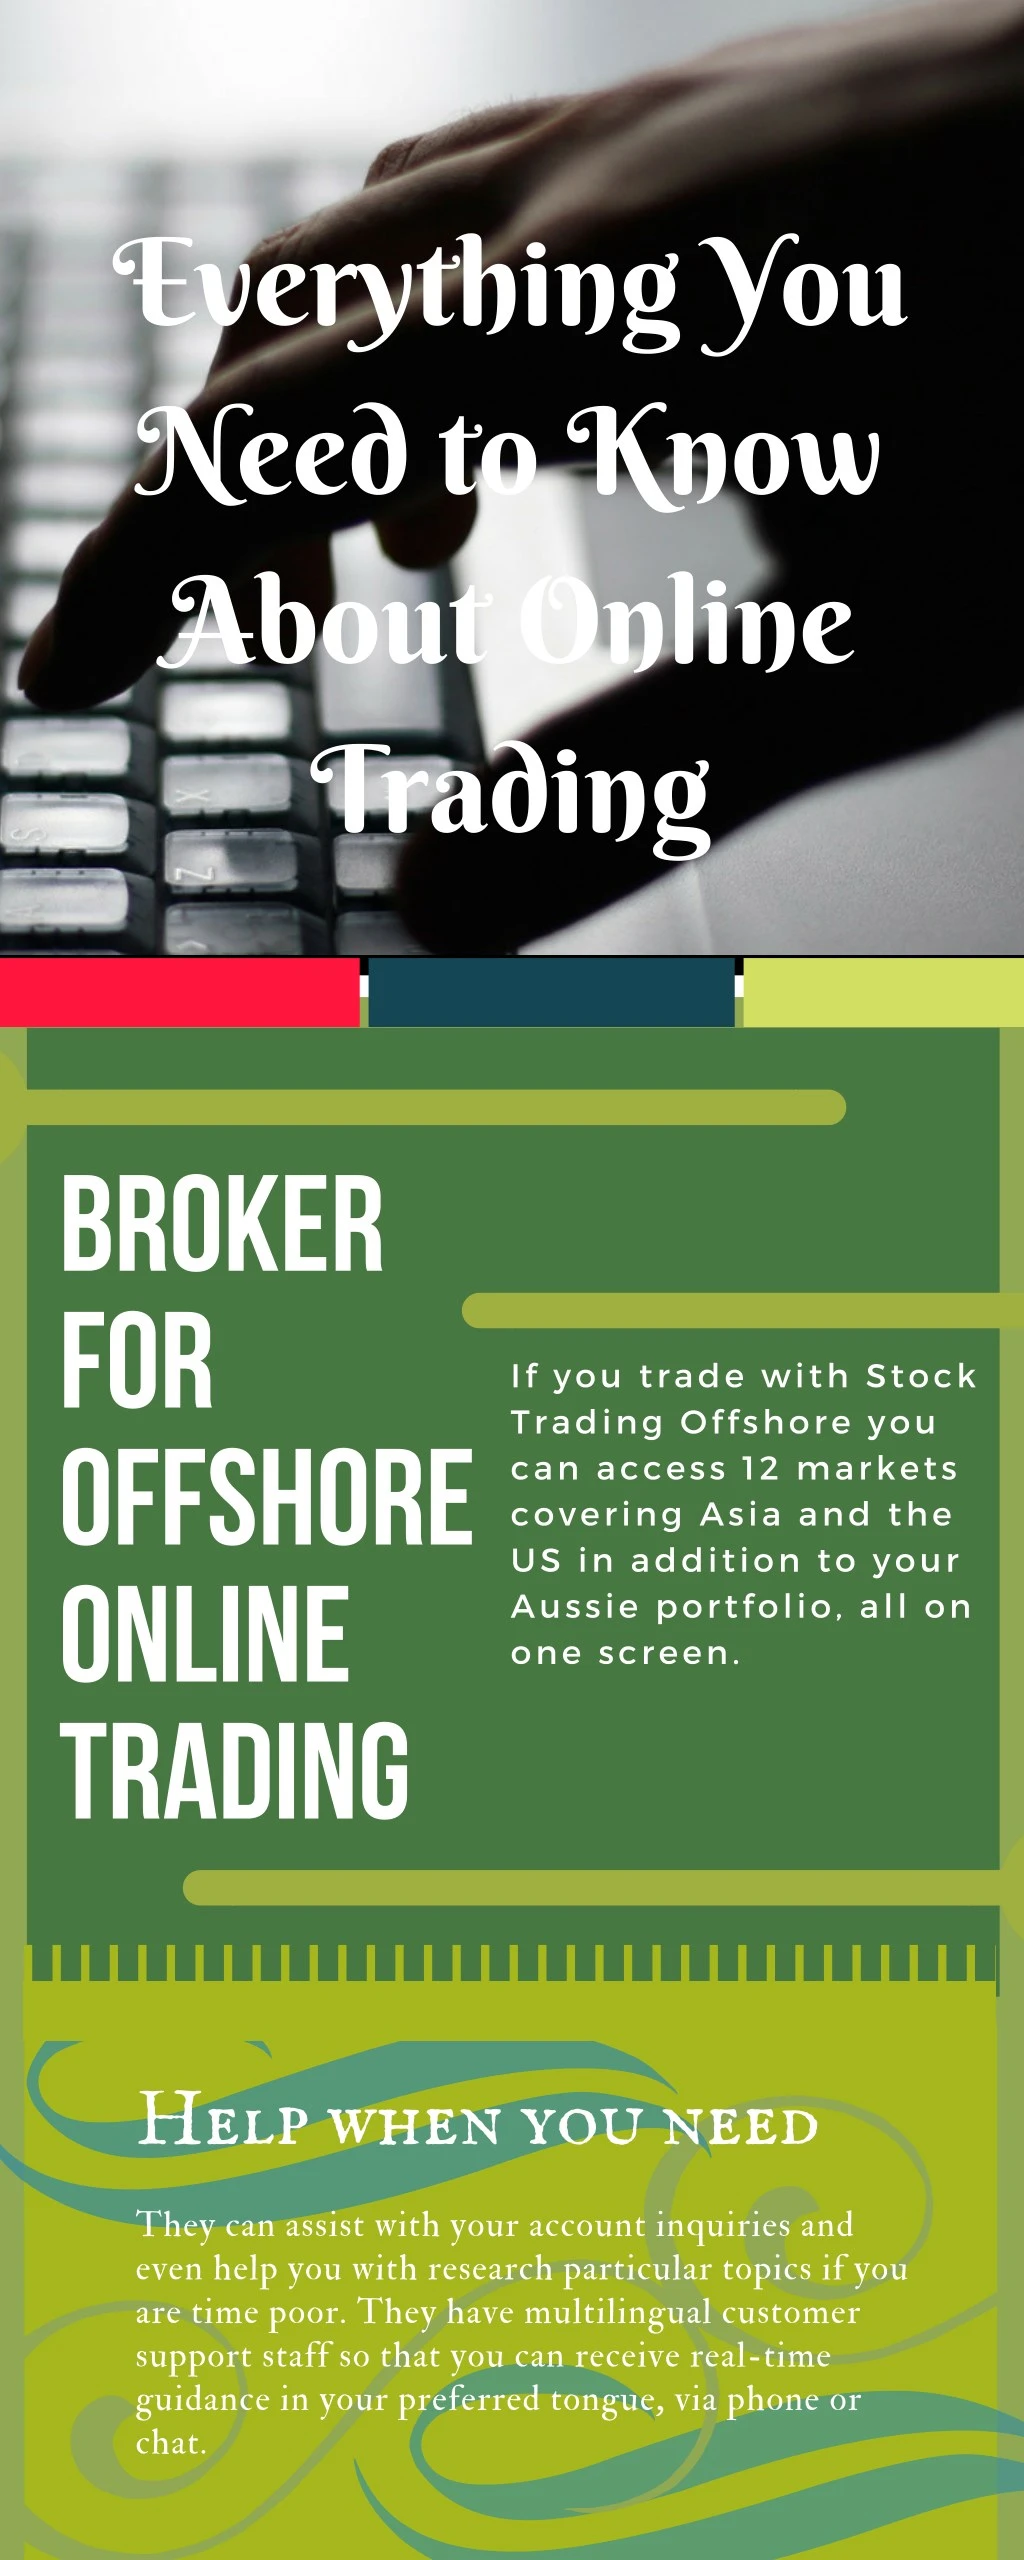 everything you need to know about online trading